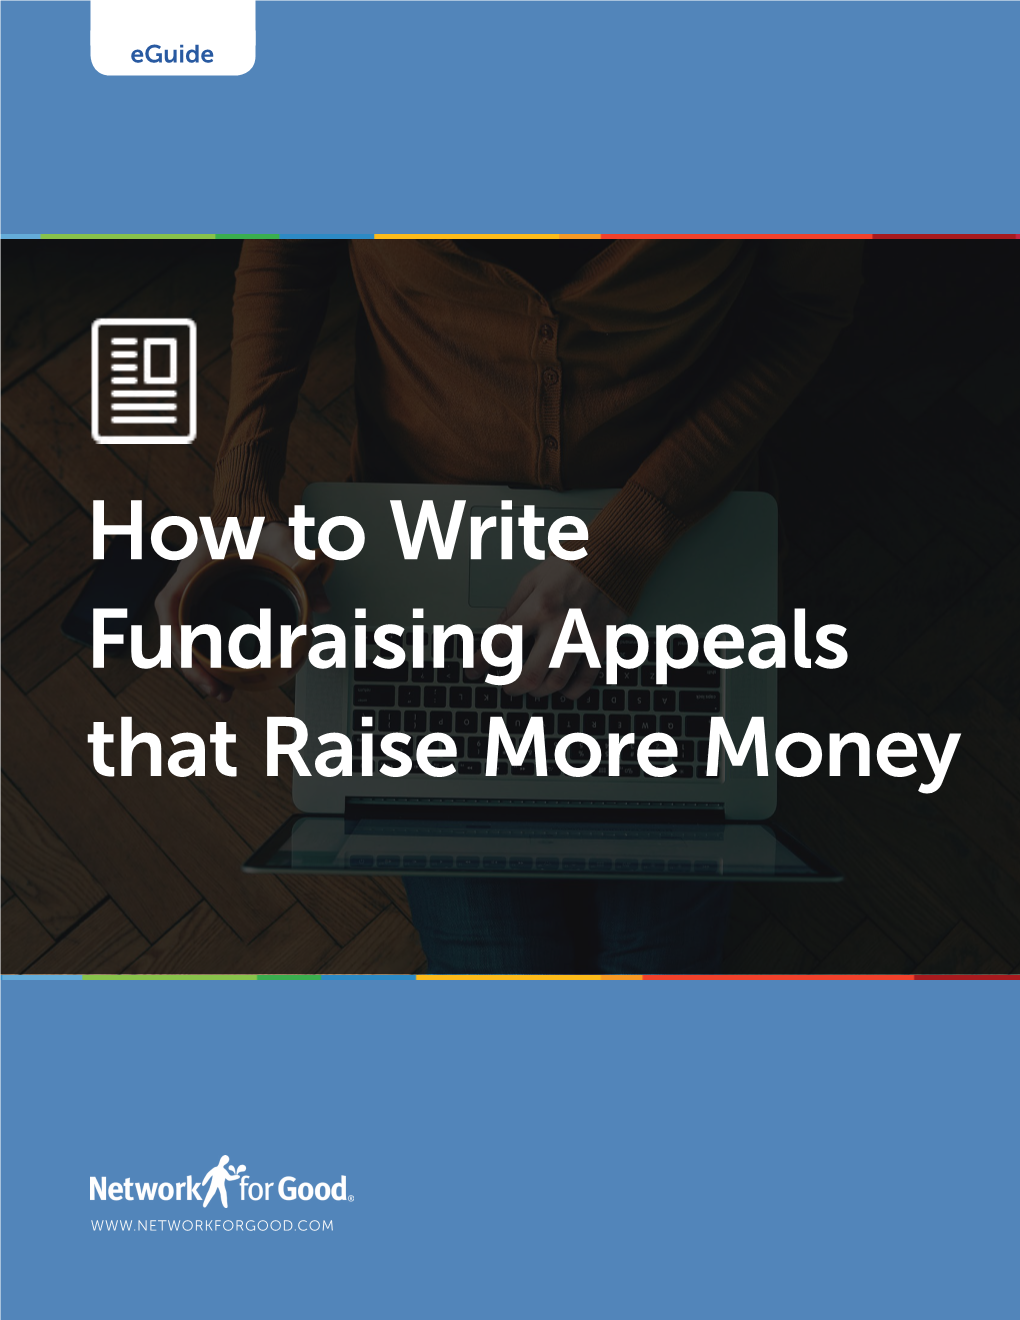 How to Write Fundraising Appeals That Raise More Money